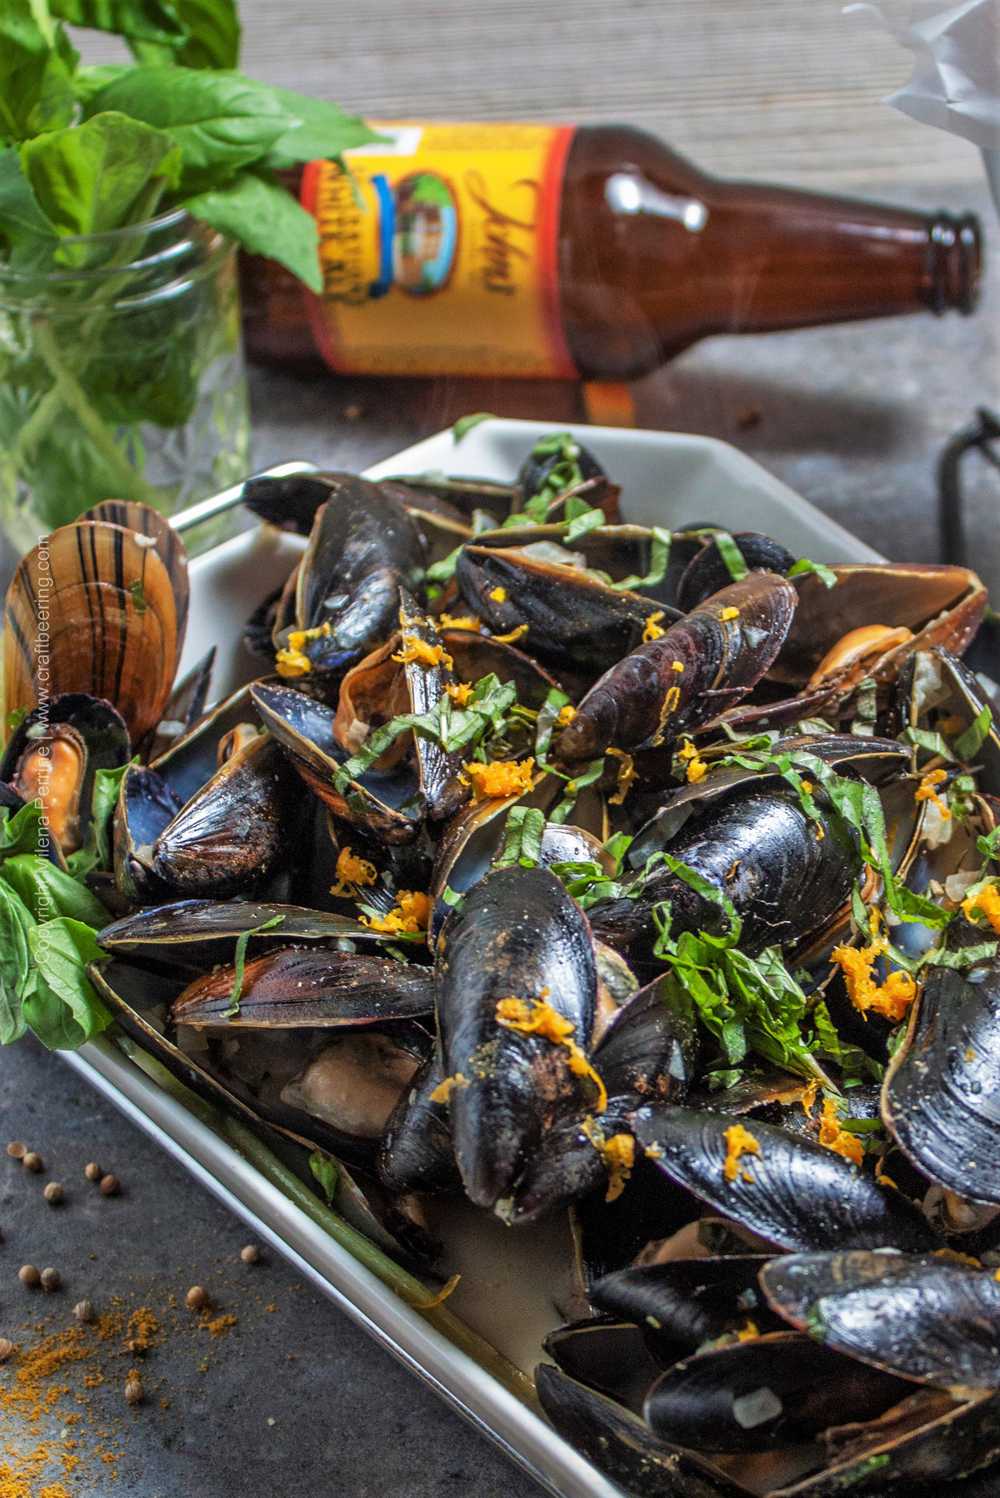 Coconut milk and beer steamed mussels.